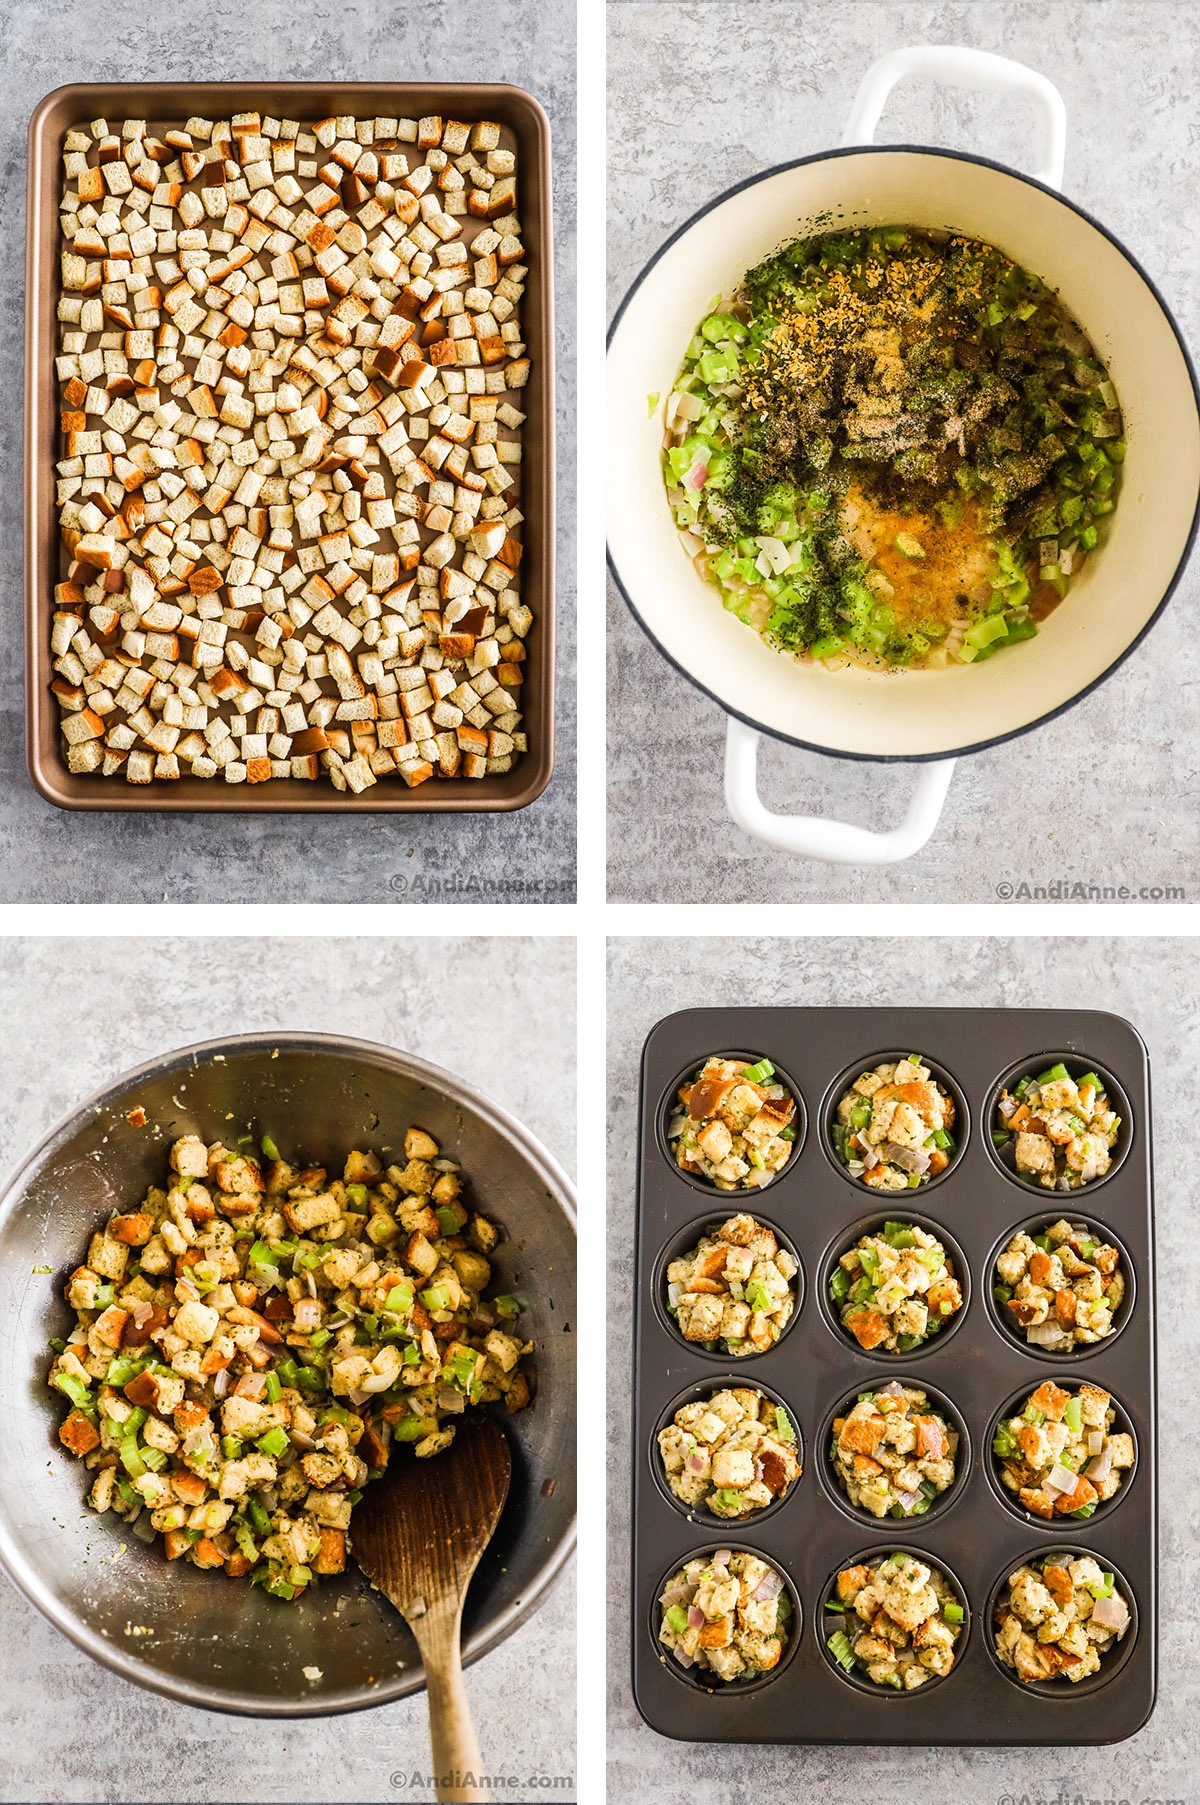 Four images grouped together. Toasted bread crumbs on a baking sheet. A white pot with cooked vegetables and spices. A steel bowl with stuffing ingredients mixture inside. A muffin pan with stuffing muffins recipe.